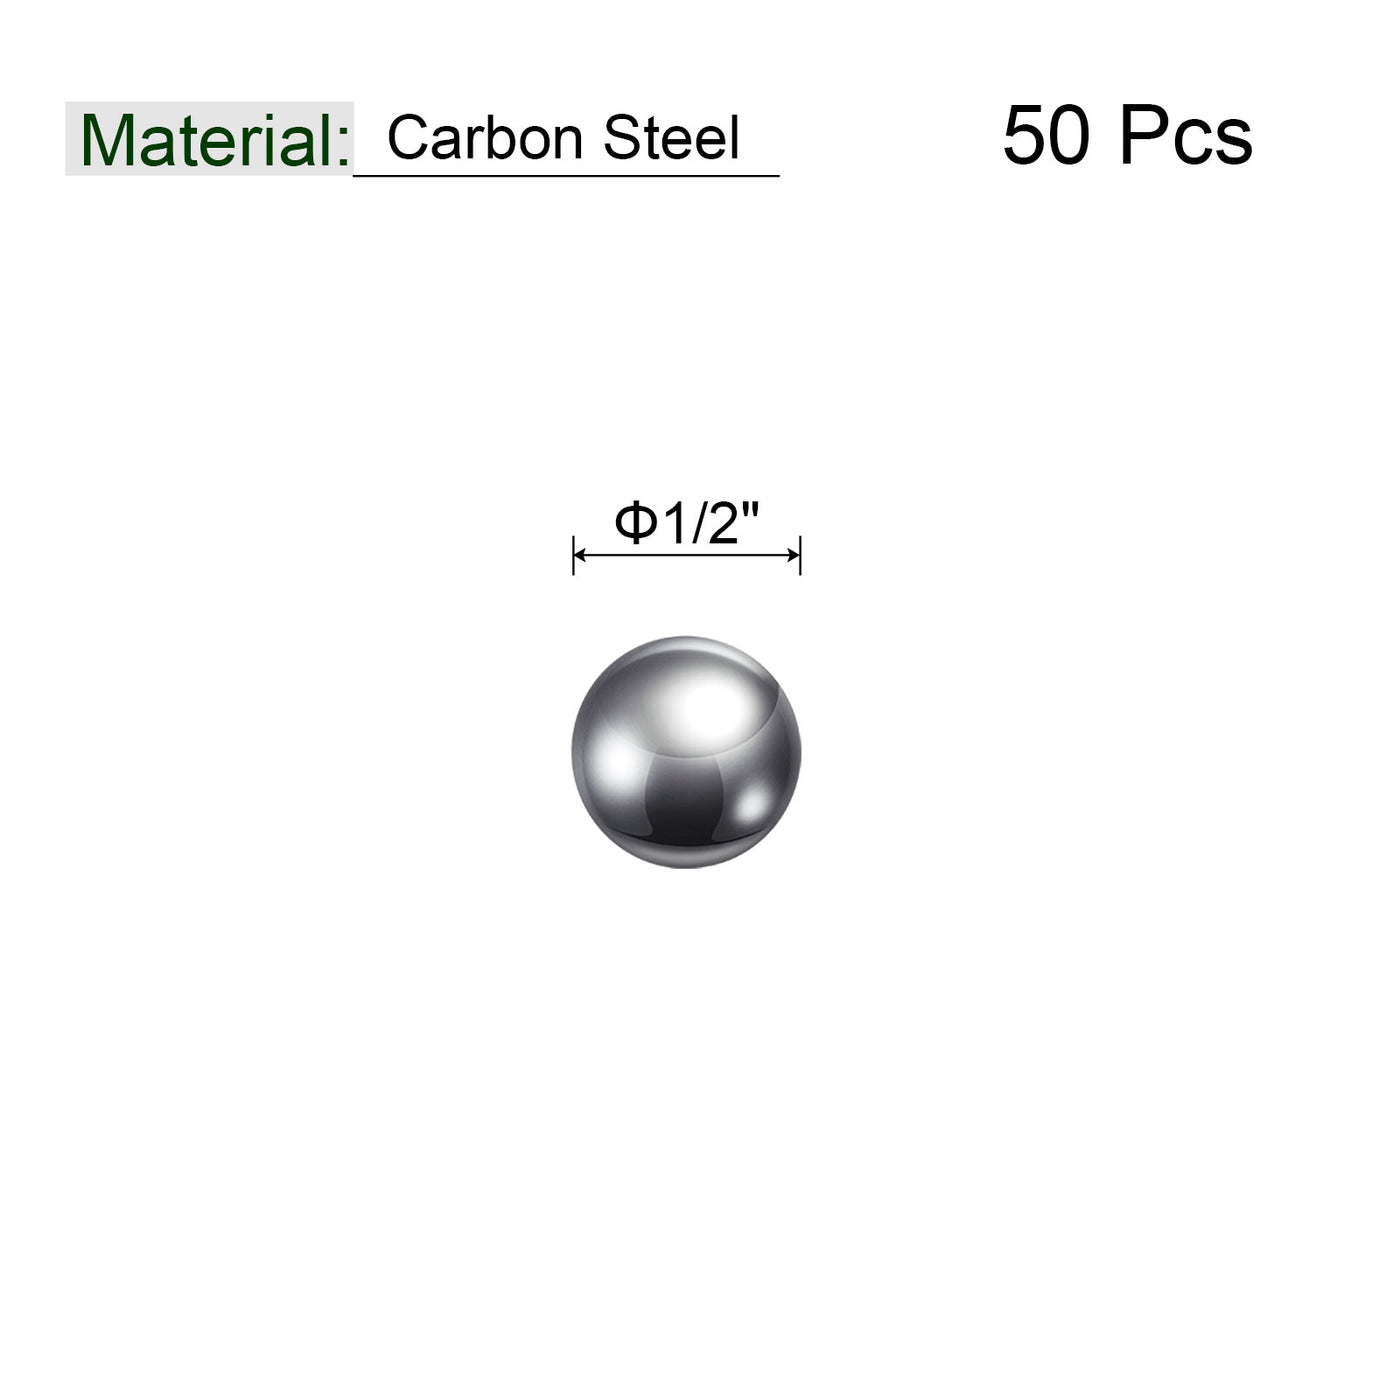 Uxcell Uxcell 100pcs 5/16" Carbon Steel Bearing Balls Precision Polished